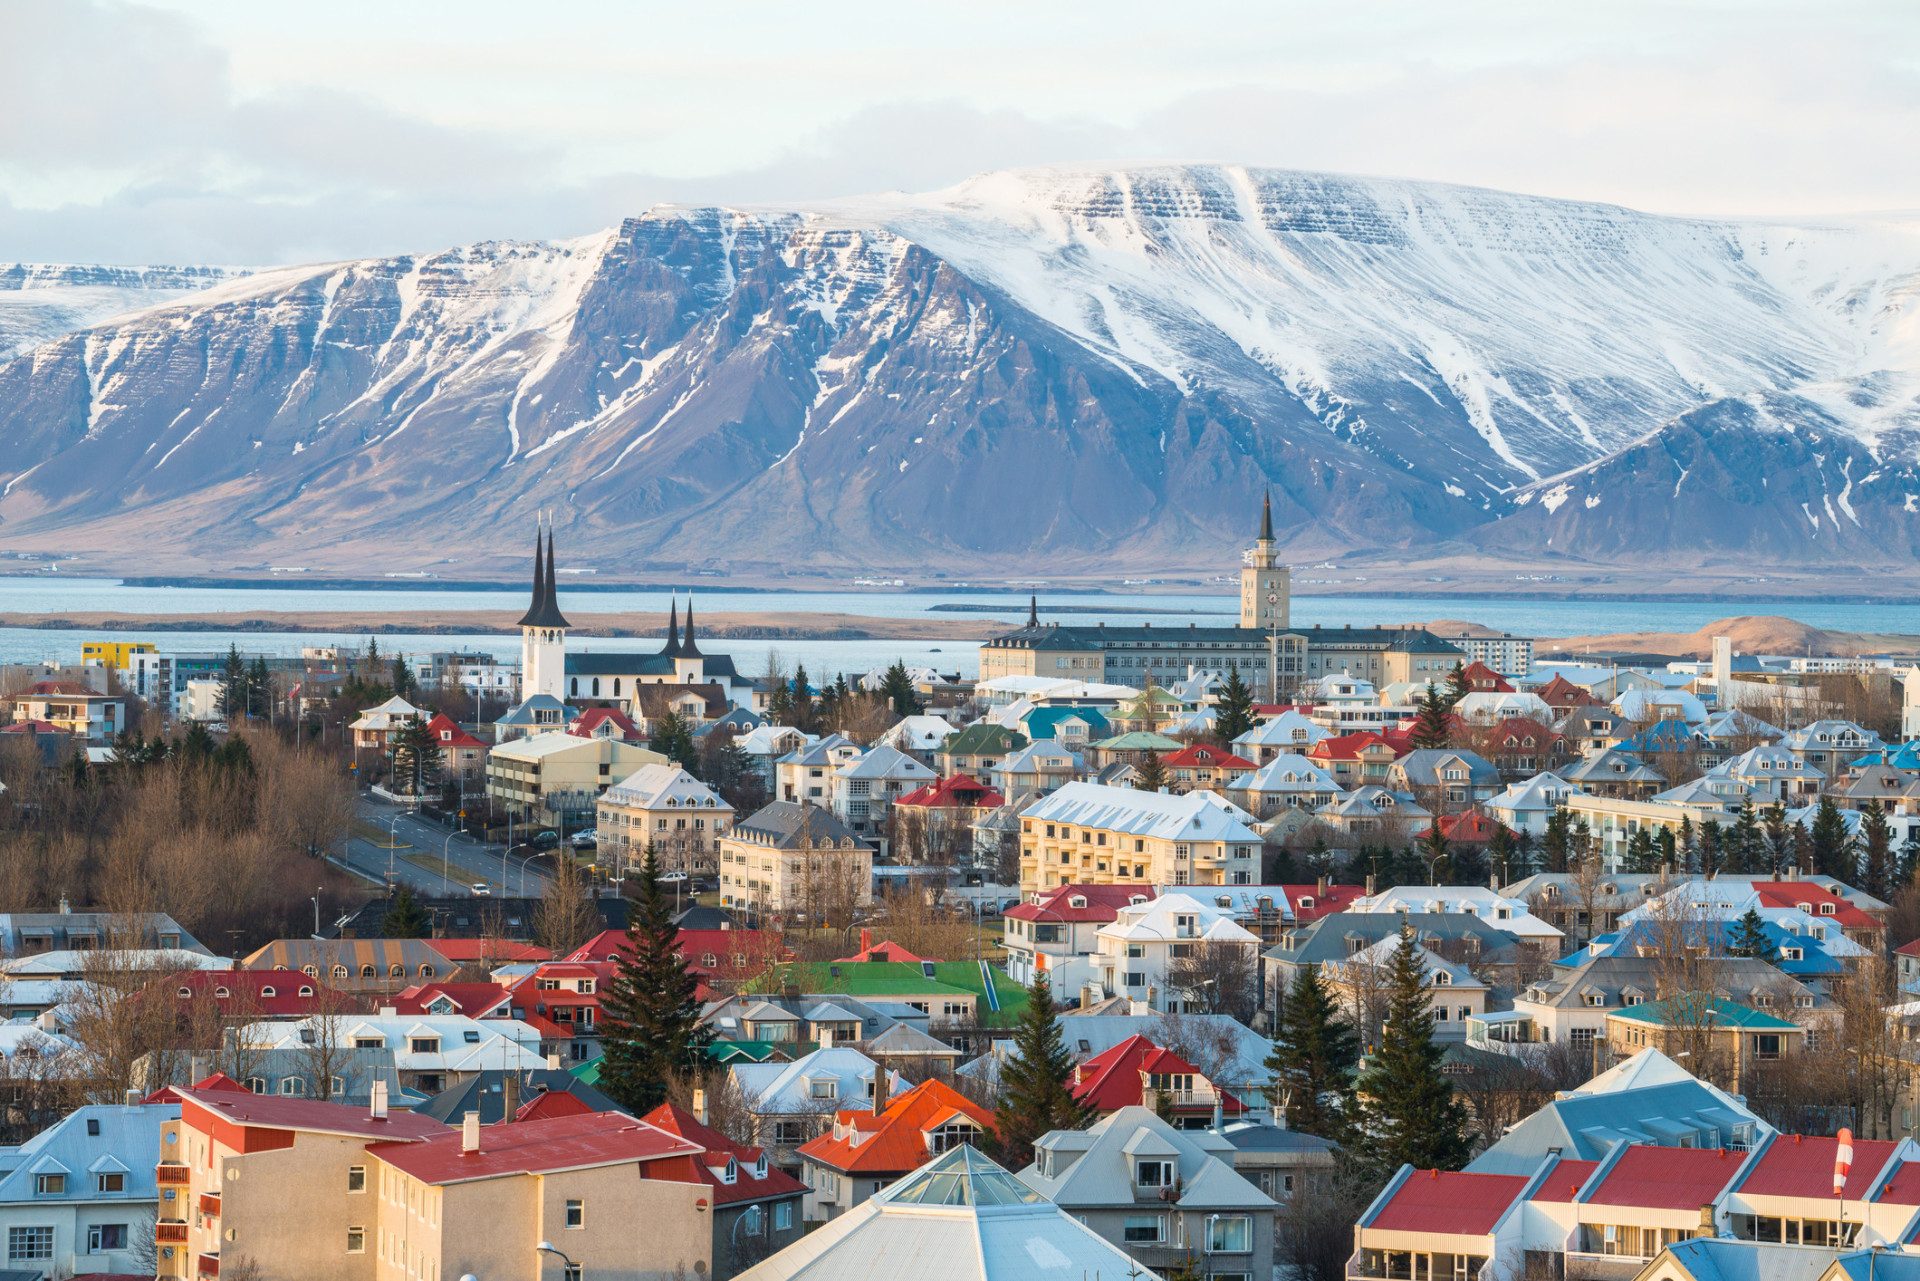 The Icelandic capital is ideal for those who love city life as much as nature. From countless green spaces, to the aurora borealis, to hot water springs, to a modern capital with all the amenities. Reykjavik has it all.<p>You may also like:<a href="https://www.starsinsider.com/n/433699?utm_source=msn.com&utm_medium=display&utm_campaign=referral_description&utm_content=233123v3en-en"> The biggest royal scandals around the world</a></p>